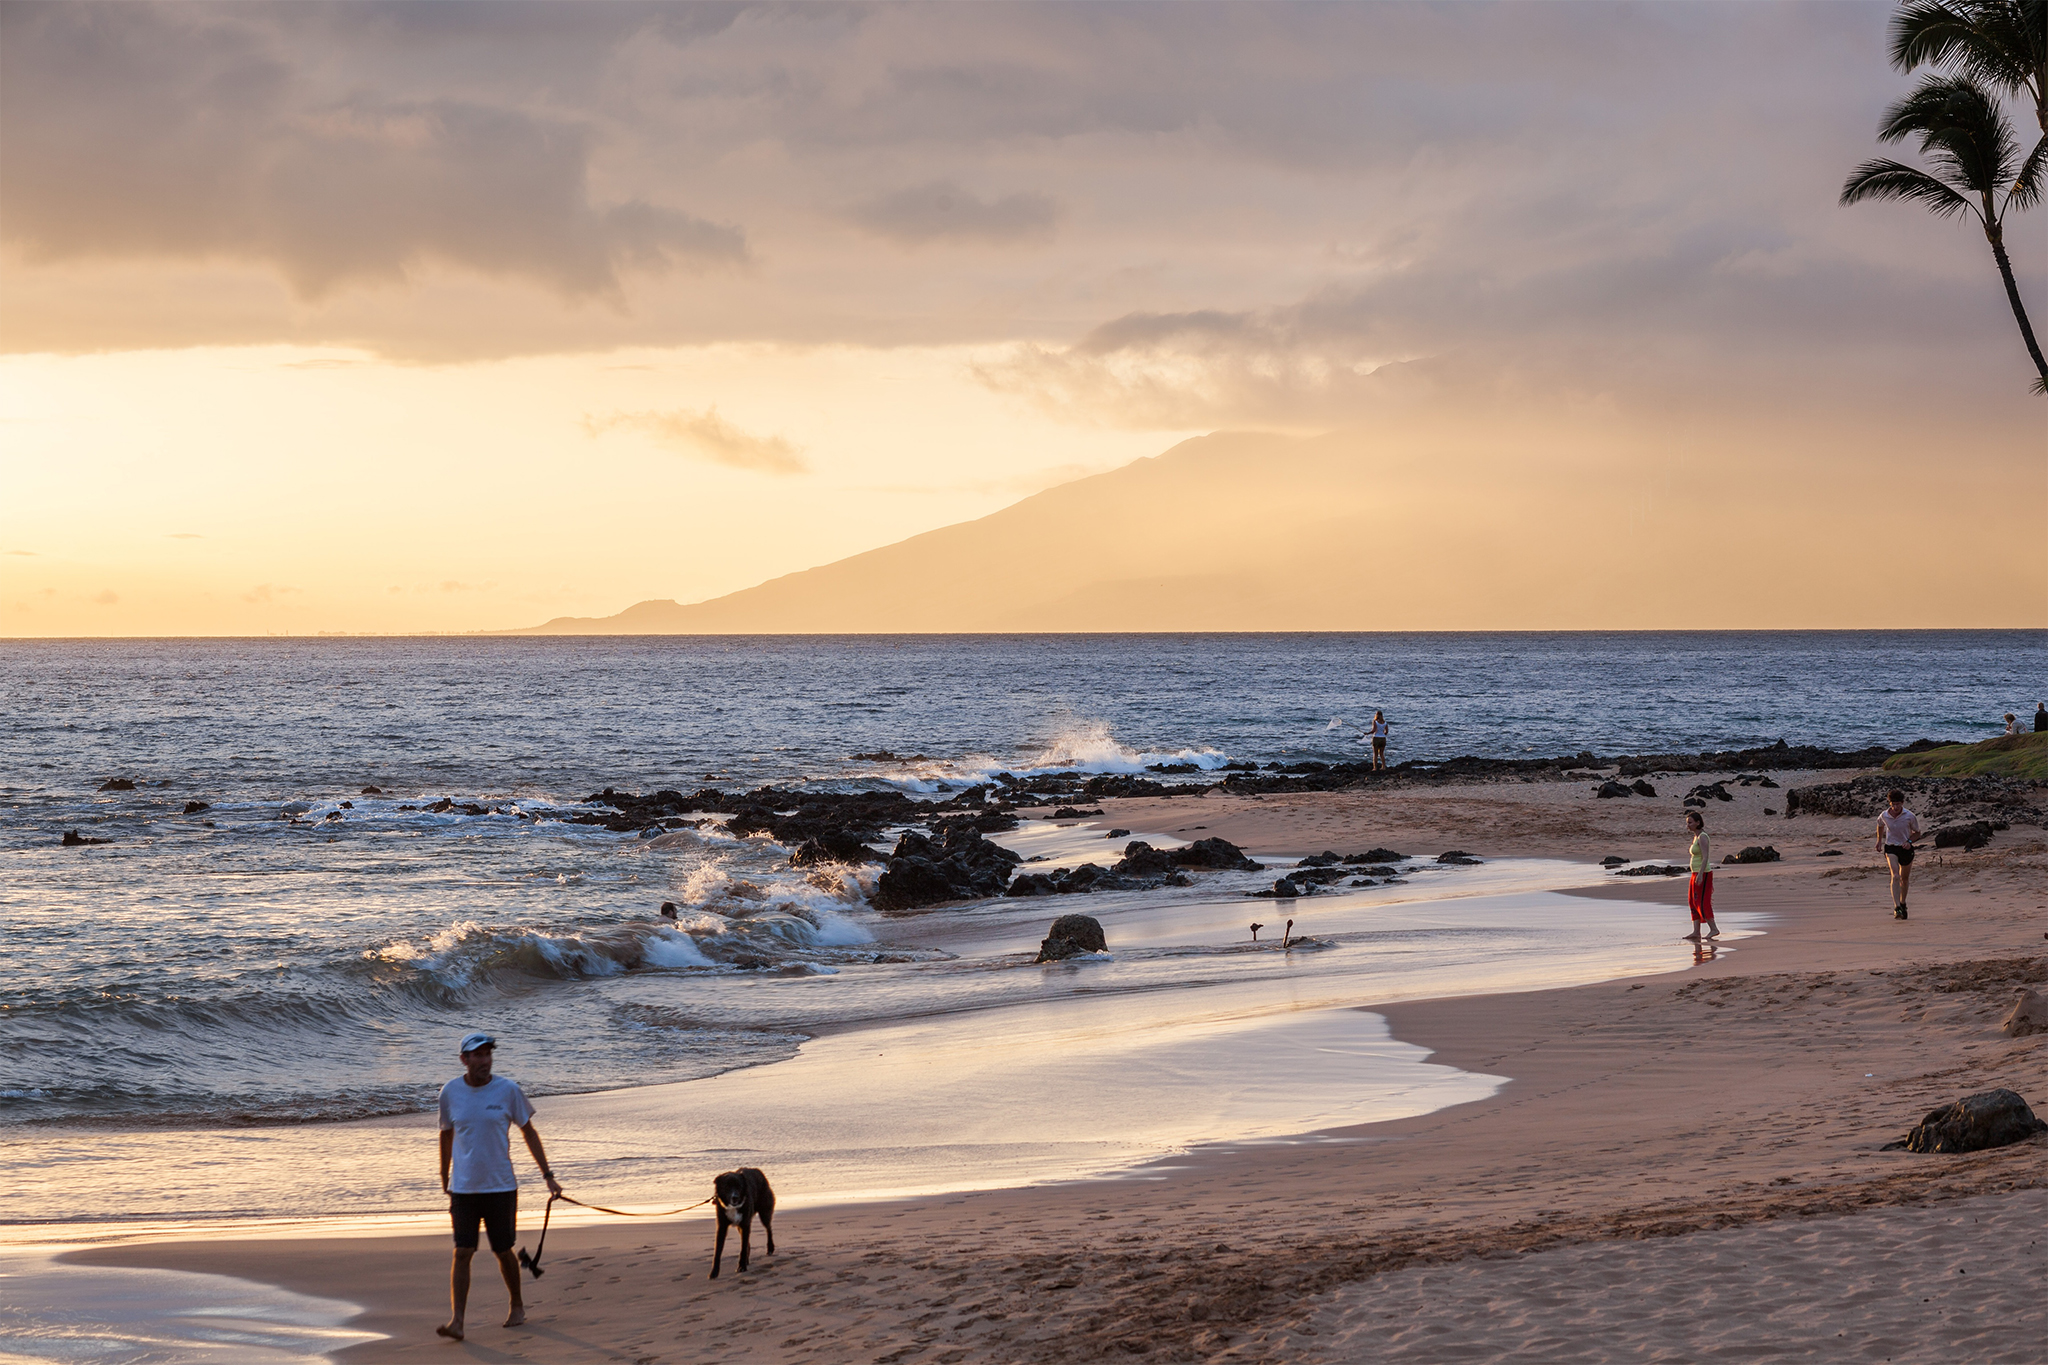 Why Maui has the most shark attacks in Hawaii